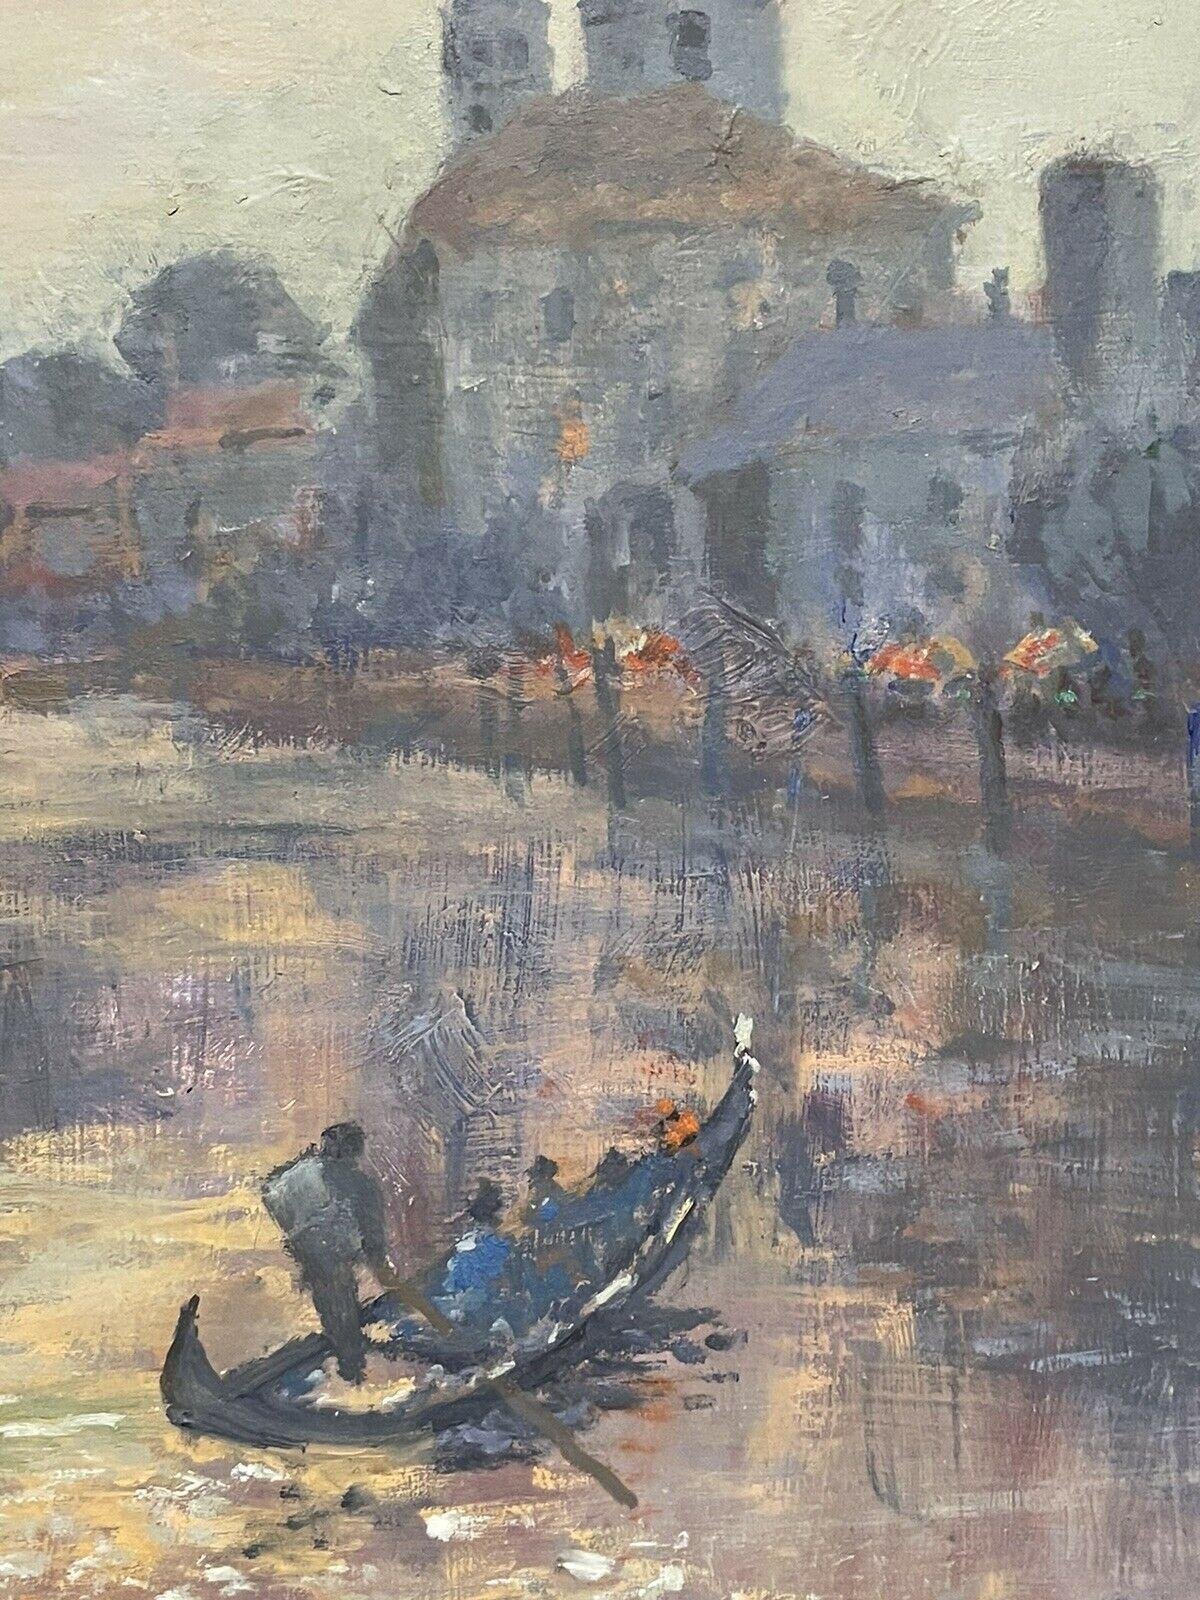 Artist/ School: Barbera Doyle, signed lower corner

Title: Venice (fully titled to label verso). 

Medium:  oil painting on board

Size:  frame: 20.5 x 20.5 inches
       painting: 17.5 x 17.5 inches

Provenance: private collection,